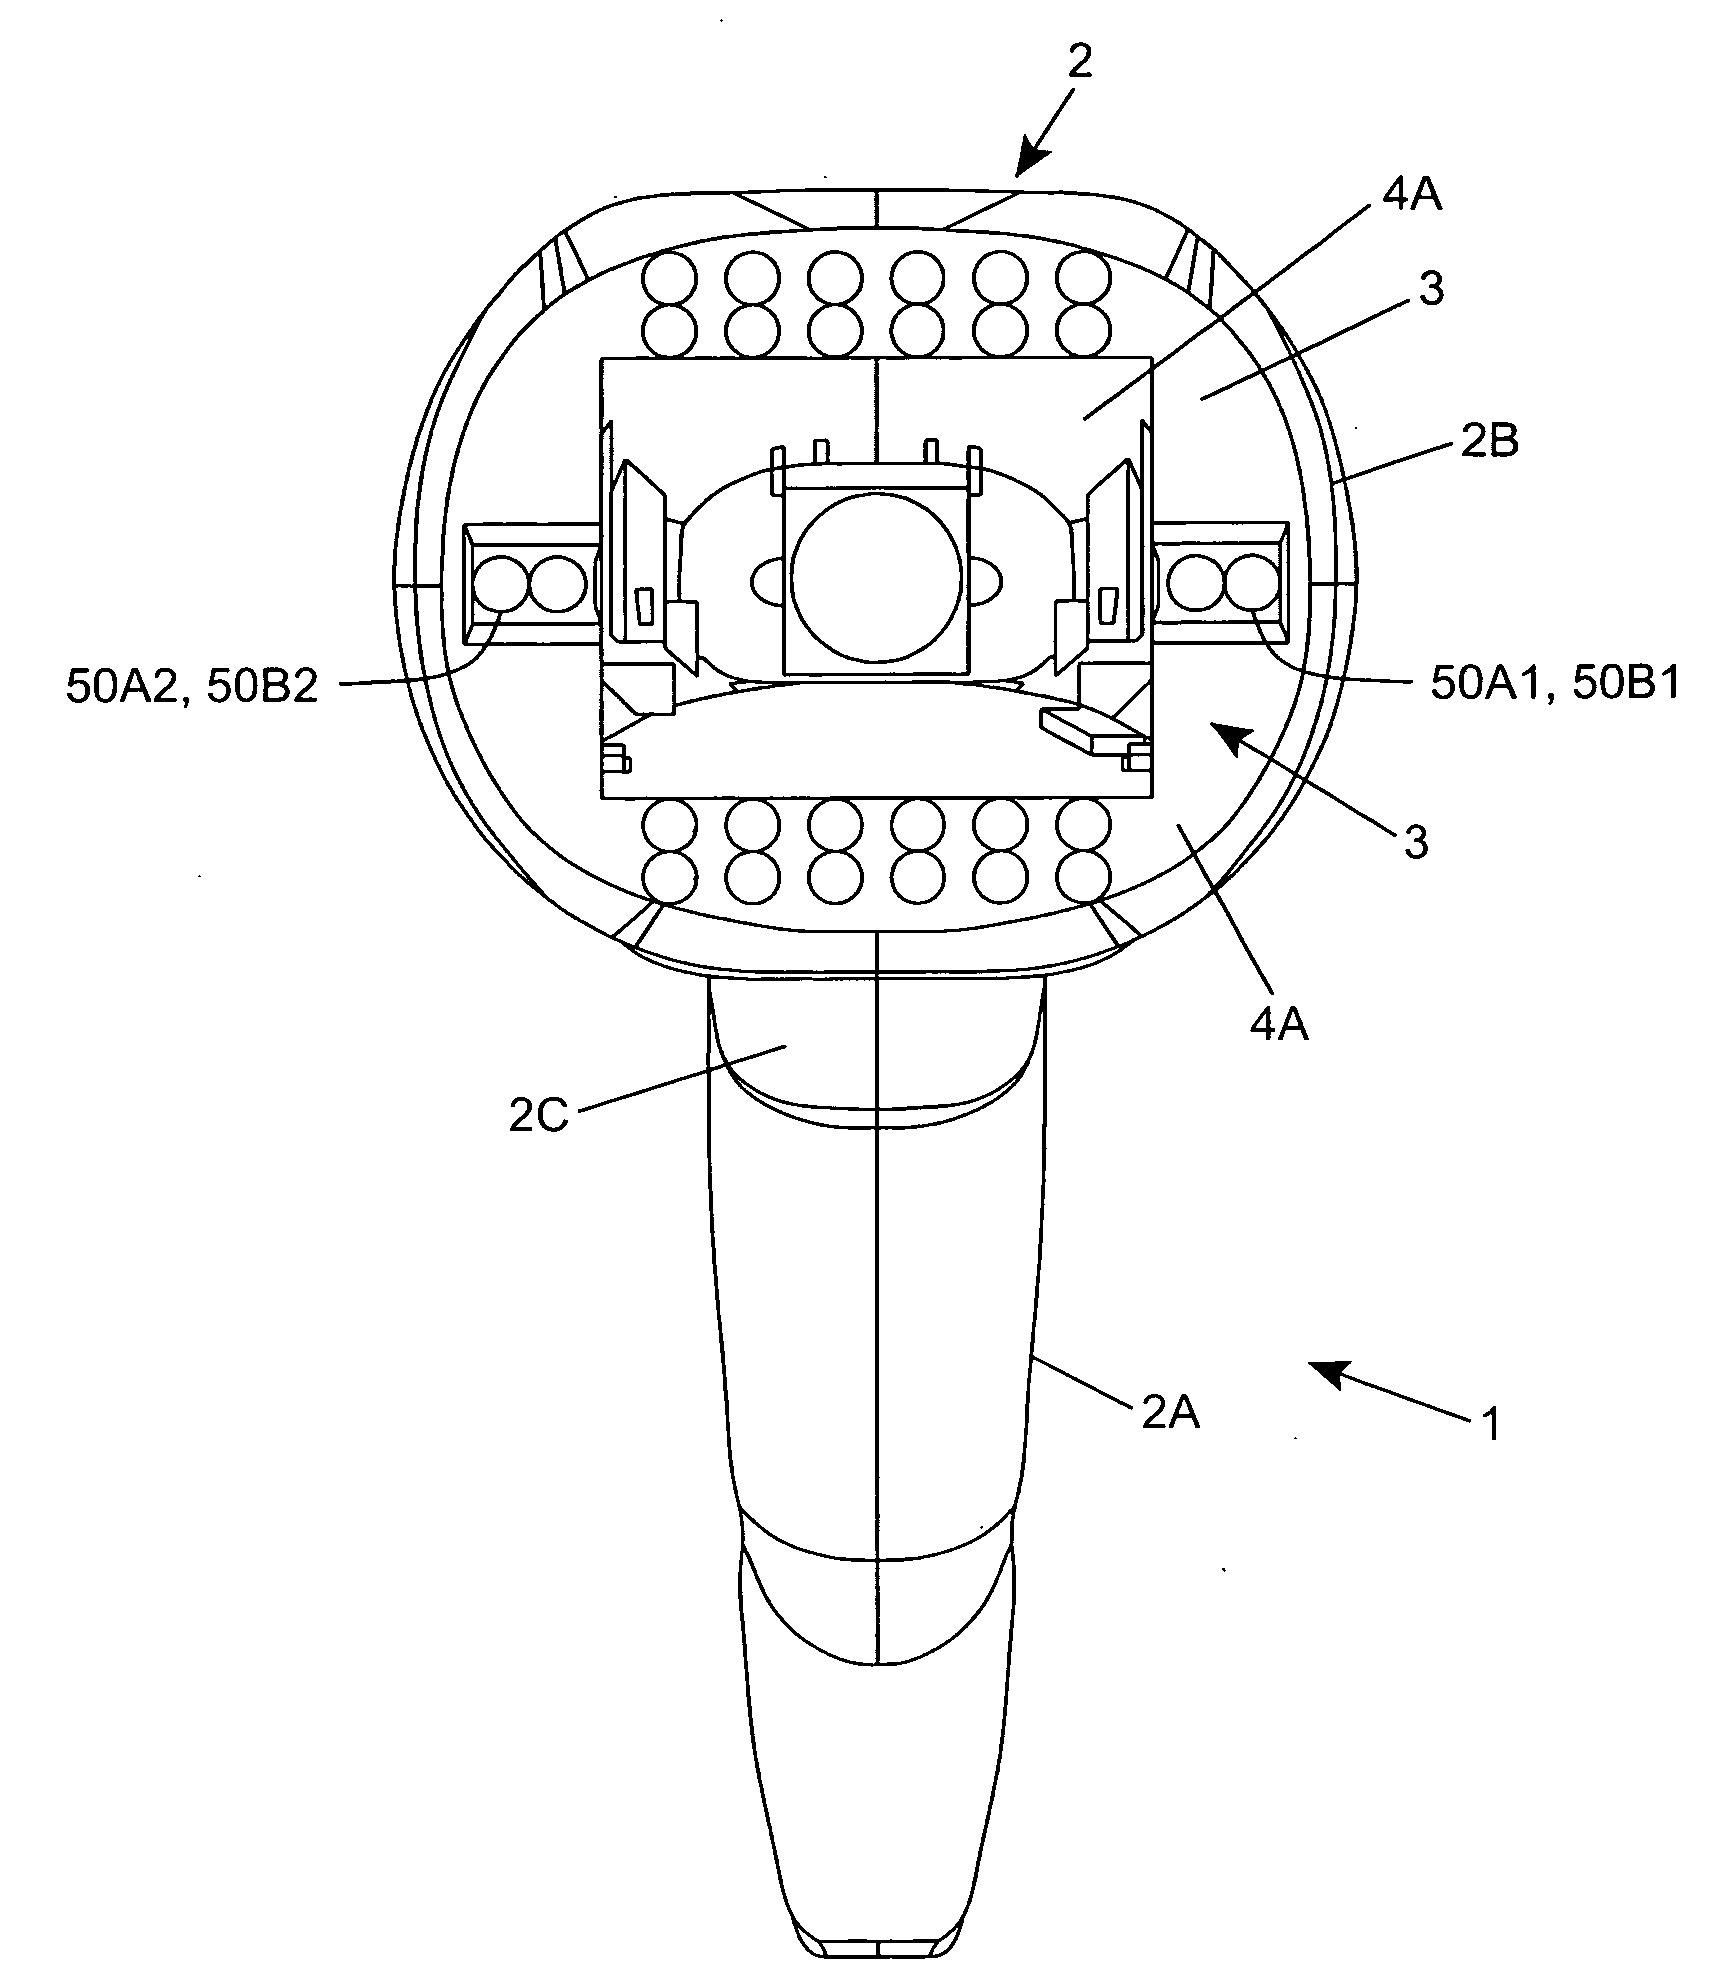 Method of modifying and/or extending the standard features and functions of a digital image capture and processing system